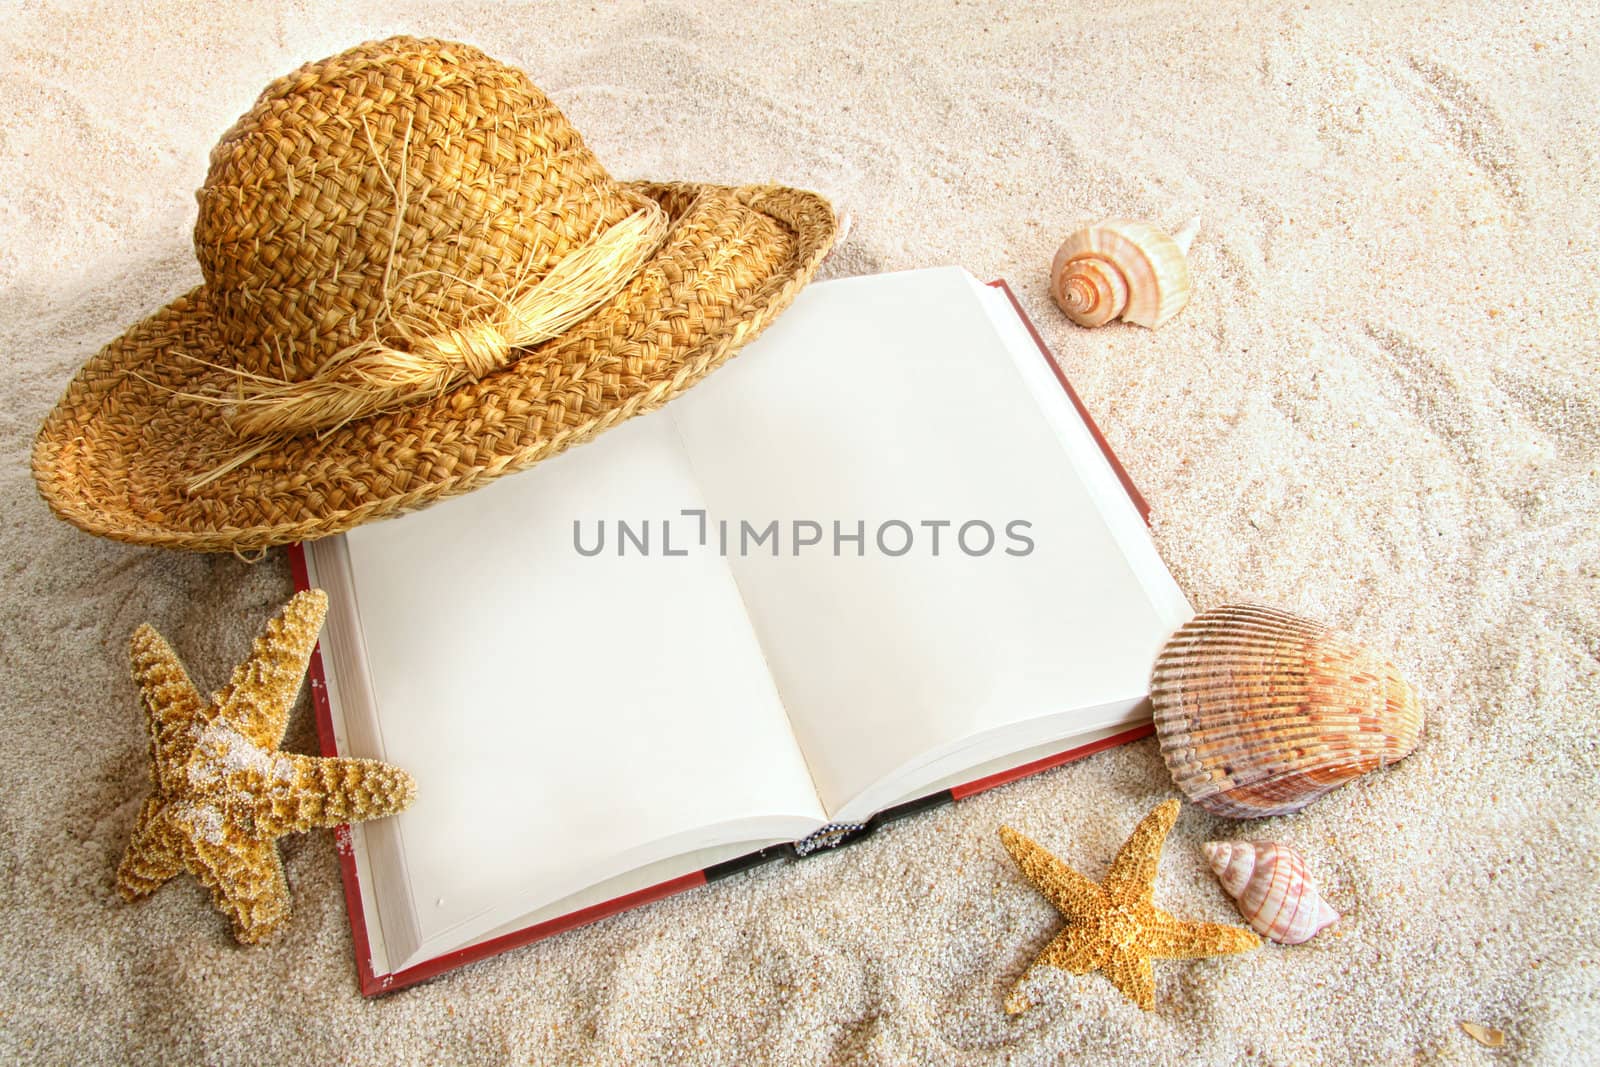 Book with straw hat and seashells in sand by Sandralise